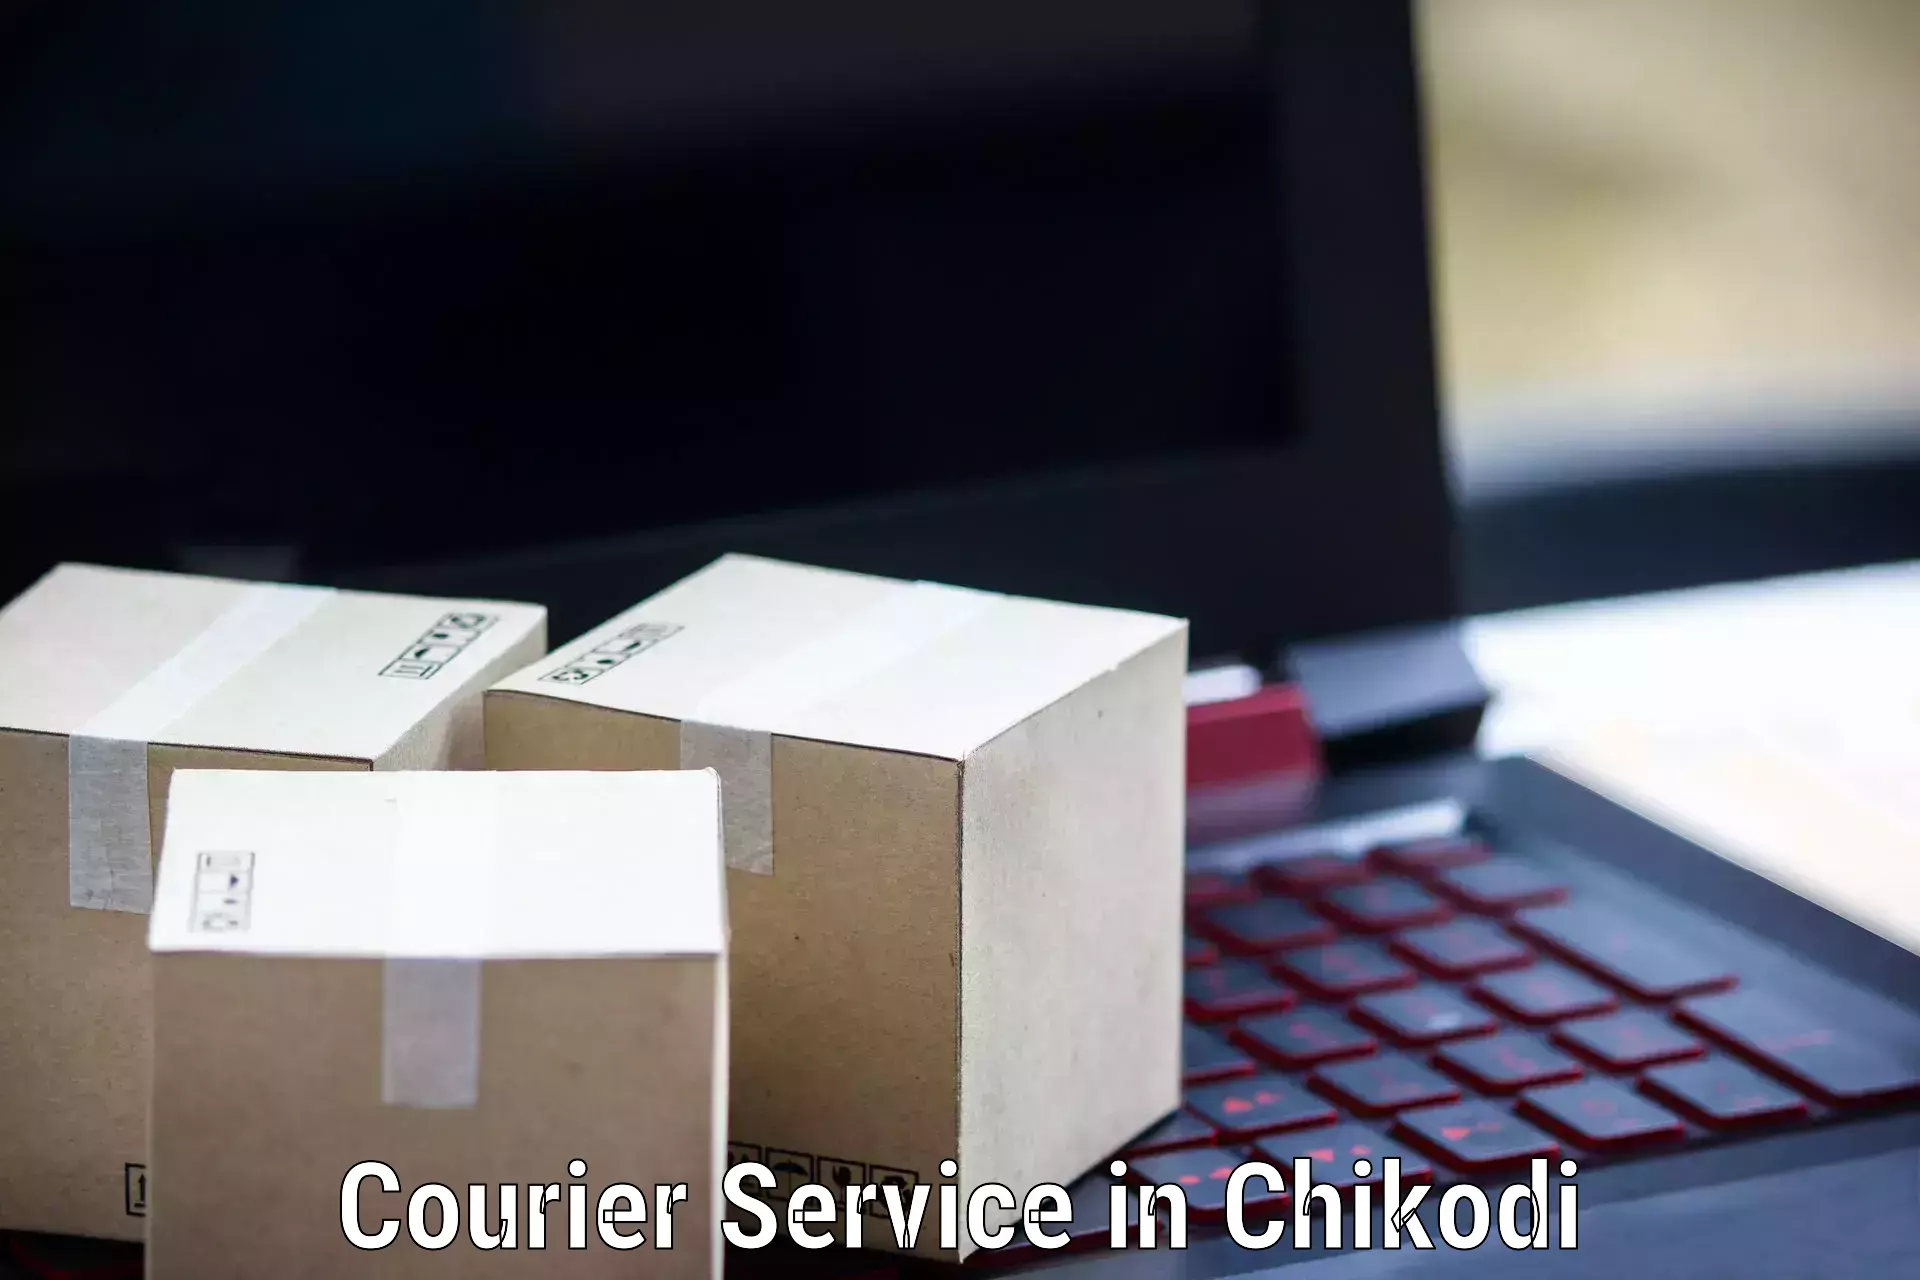 Next-day delivery options in Chikodi